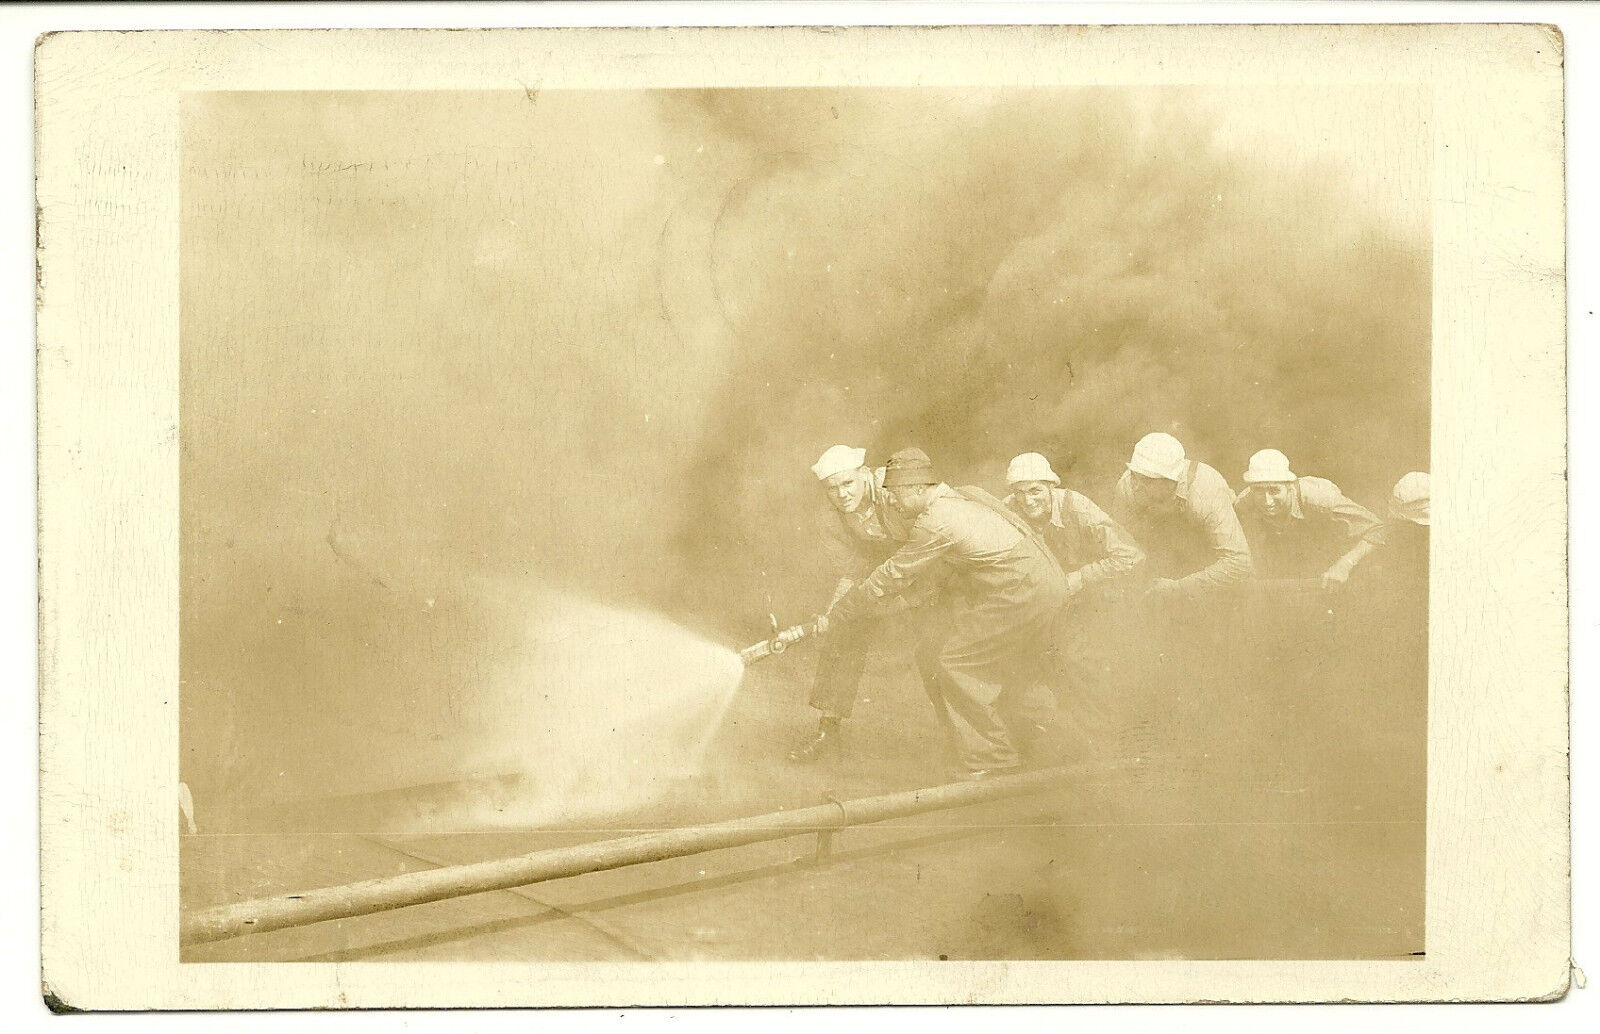  RPPC Firefighters Great Lakes Naval Station Military Jan. 5,1946 Free Franked 8